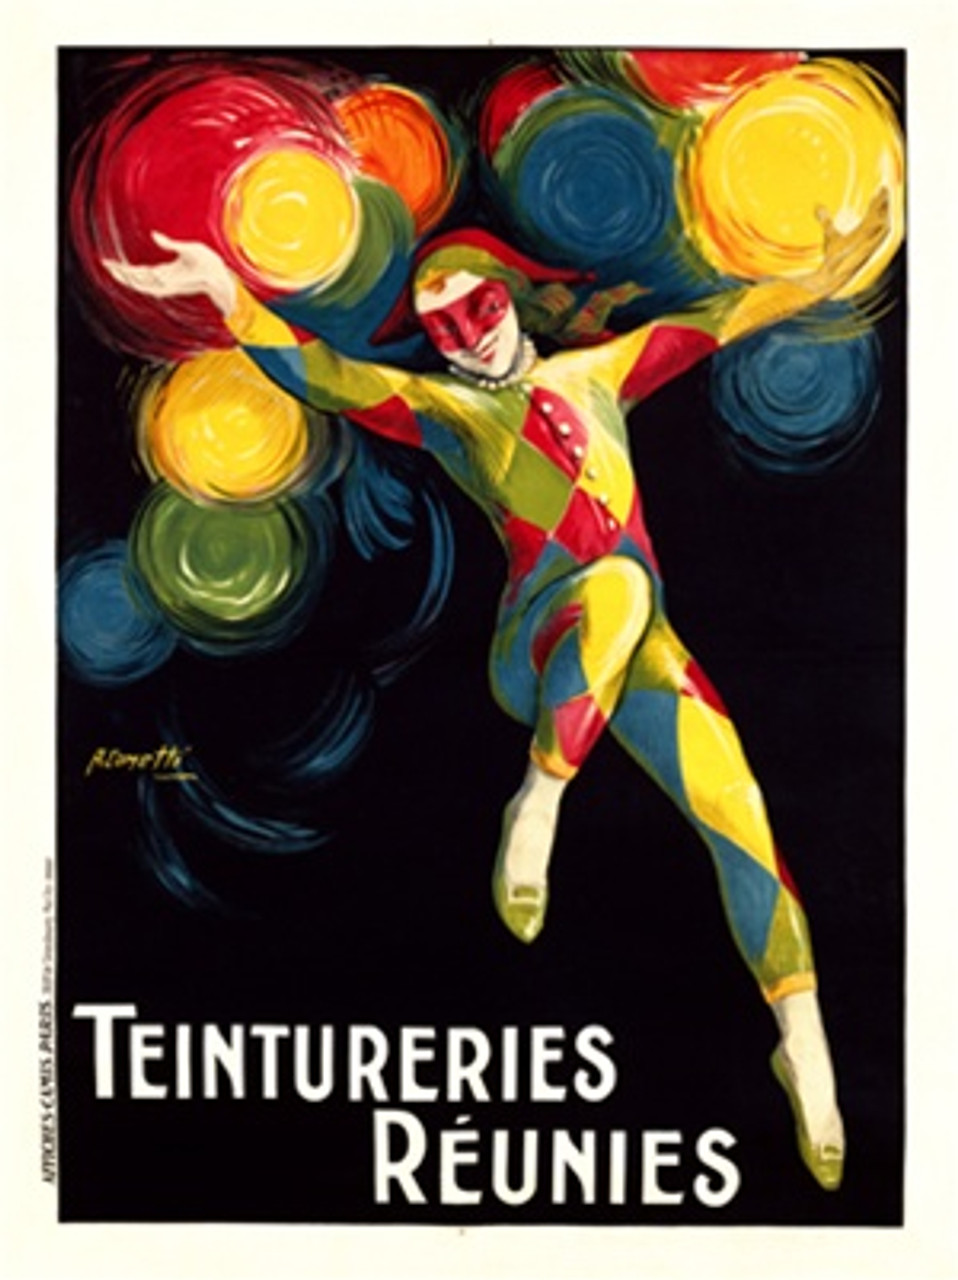 Teintureries Reunies poster by Cometti 1920 French - Beautiful Vintage Poster Reproduction. This vertical French product poster features a jester floating on a black background with colorful red, yellow and blue balls around him. Giclee Advertising Prints. Classic Posters